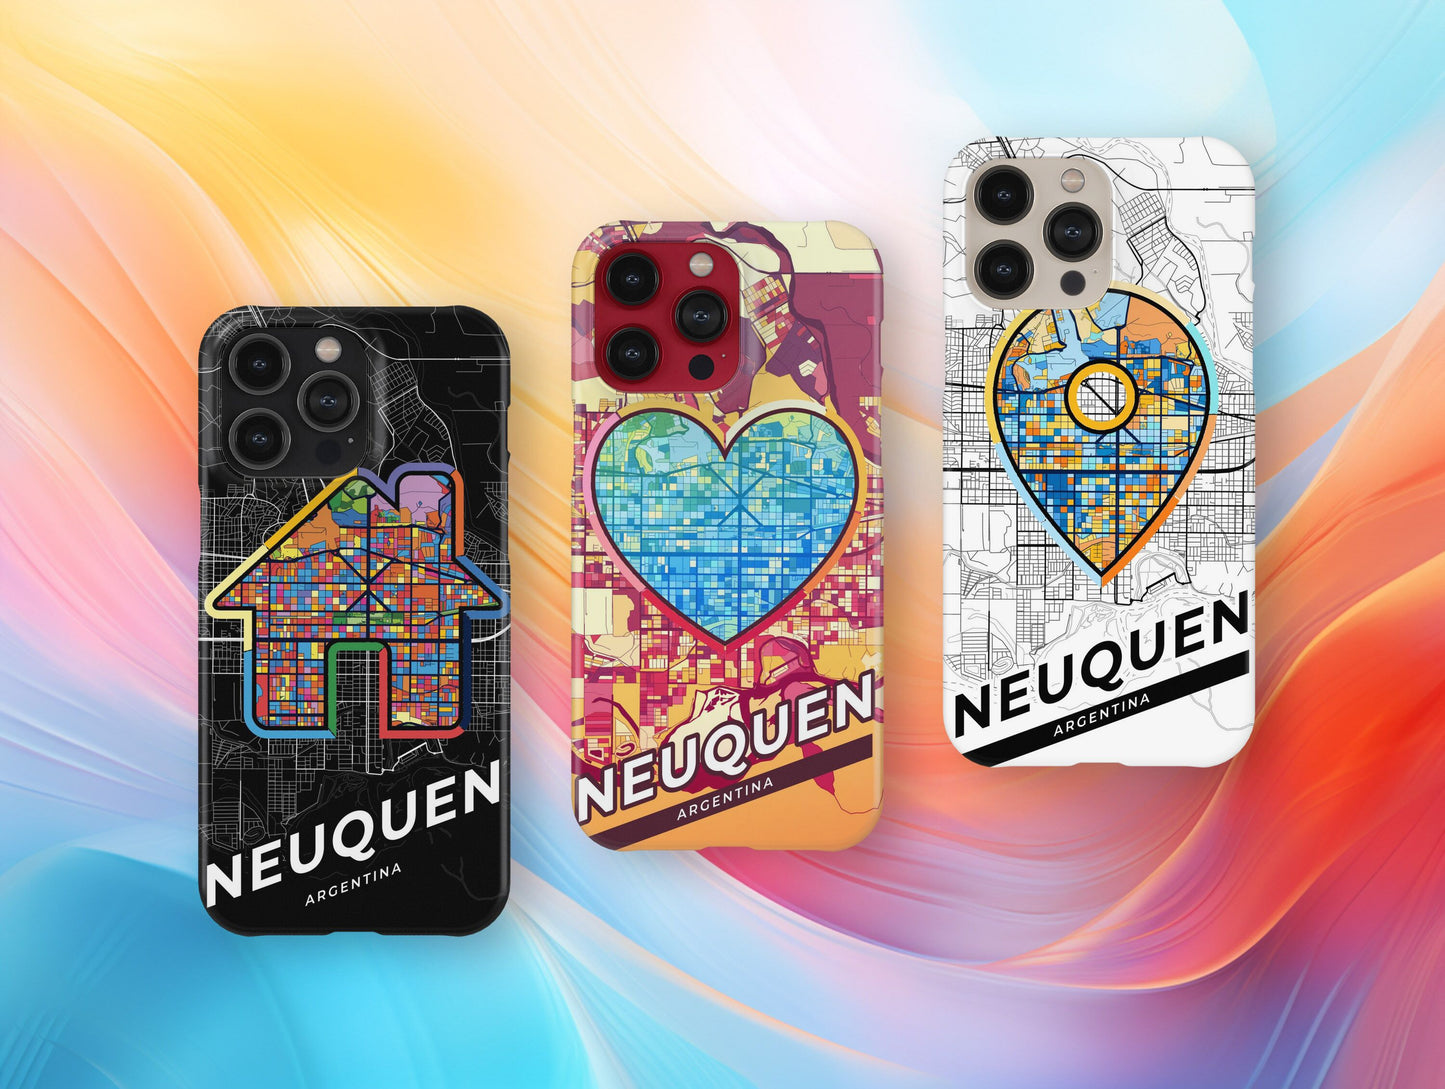 Neuquen Argentina slim phone case with colorful icon